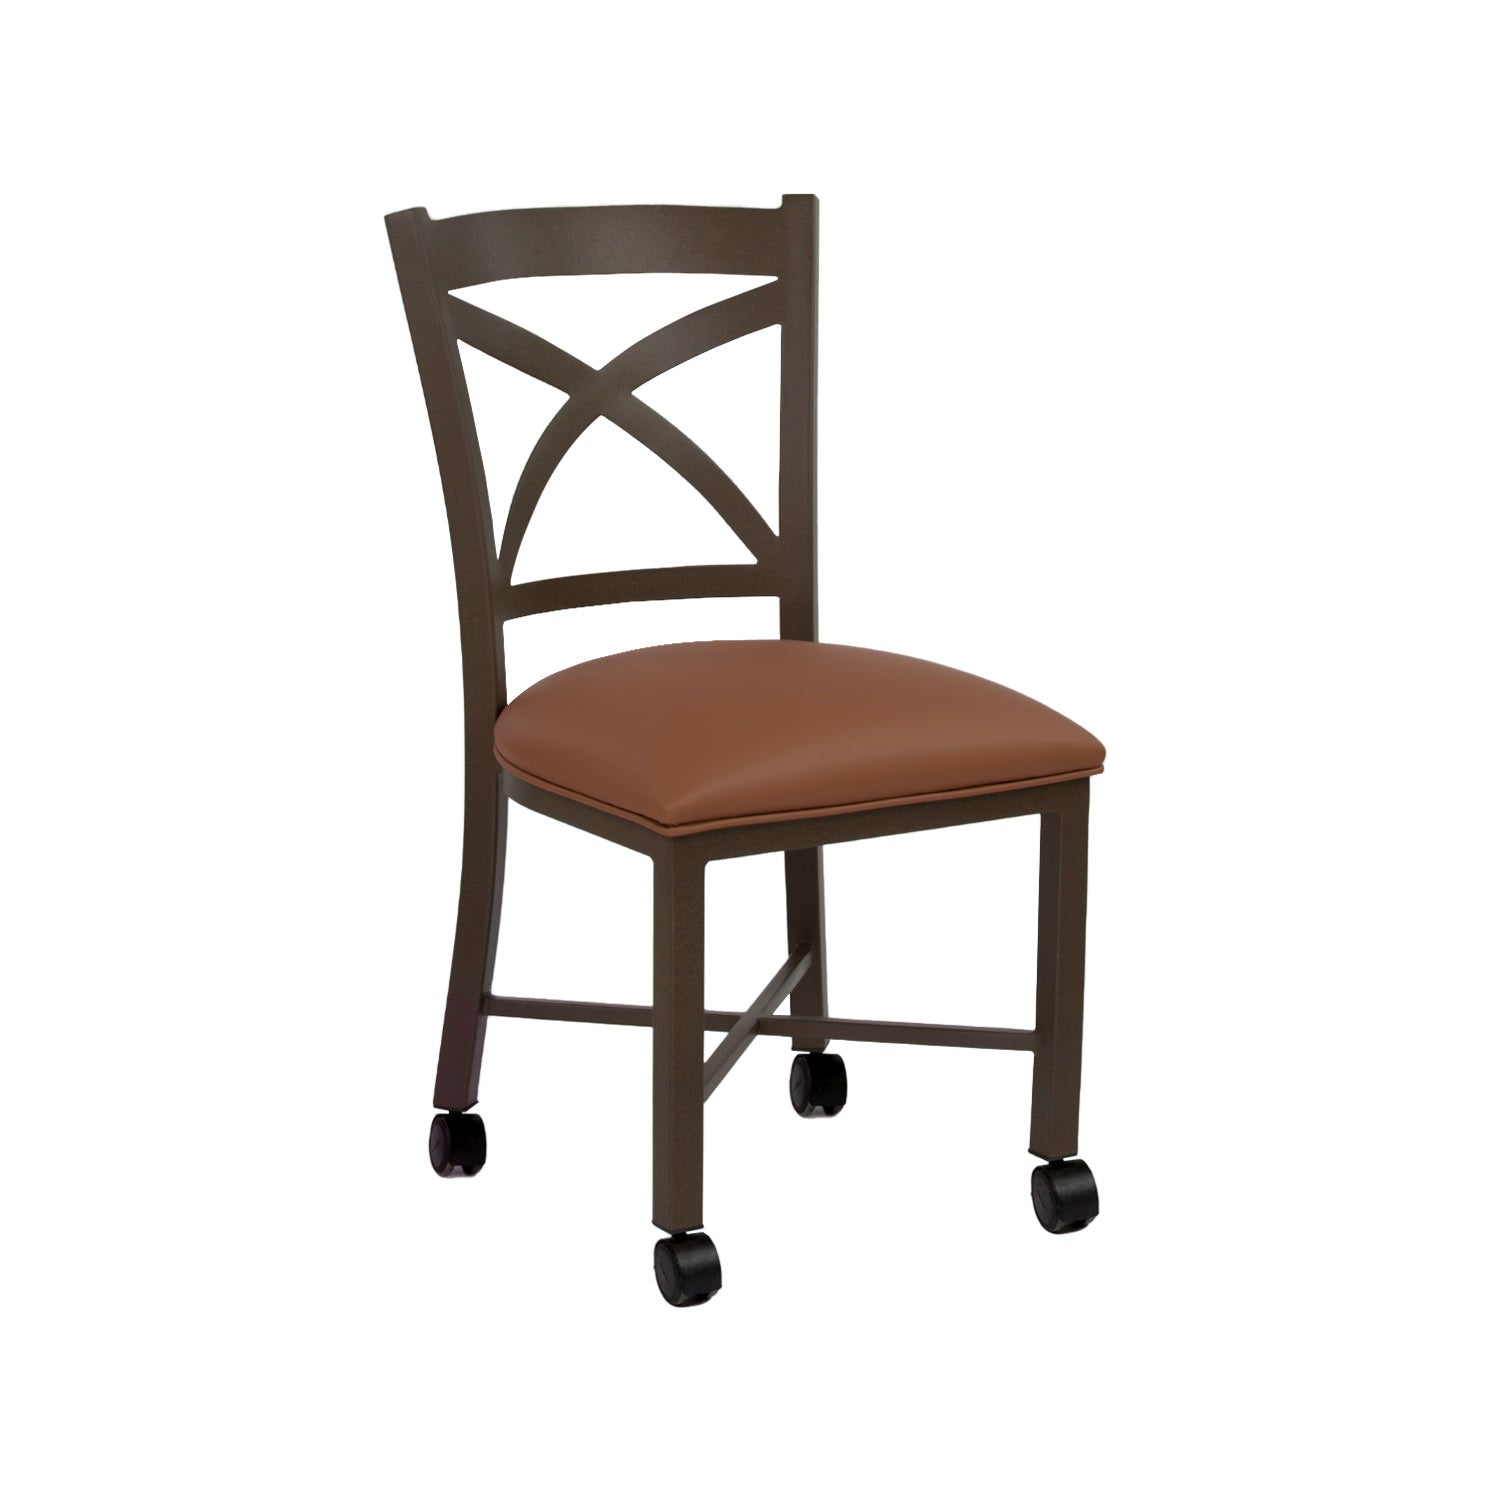 Wesley Allen Edmonton Chair in Dillon Luggage Vinyl and Speckled Oak Finish. With Casters.